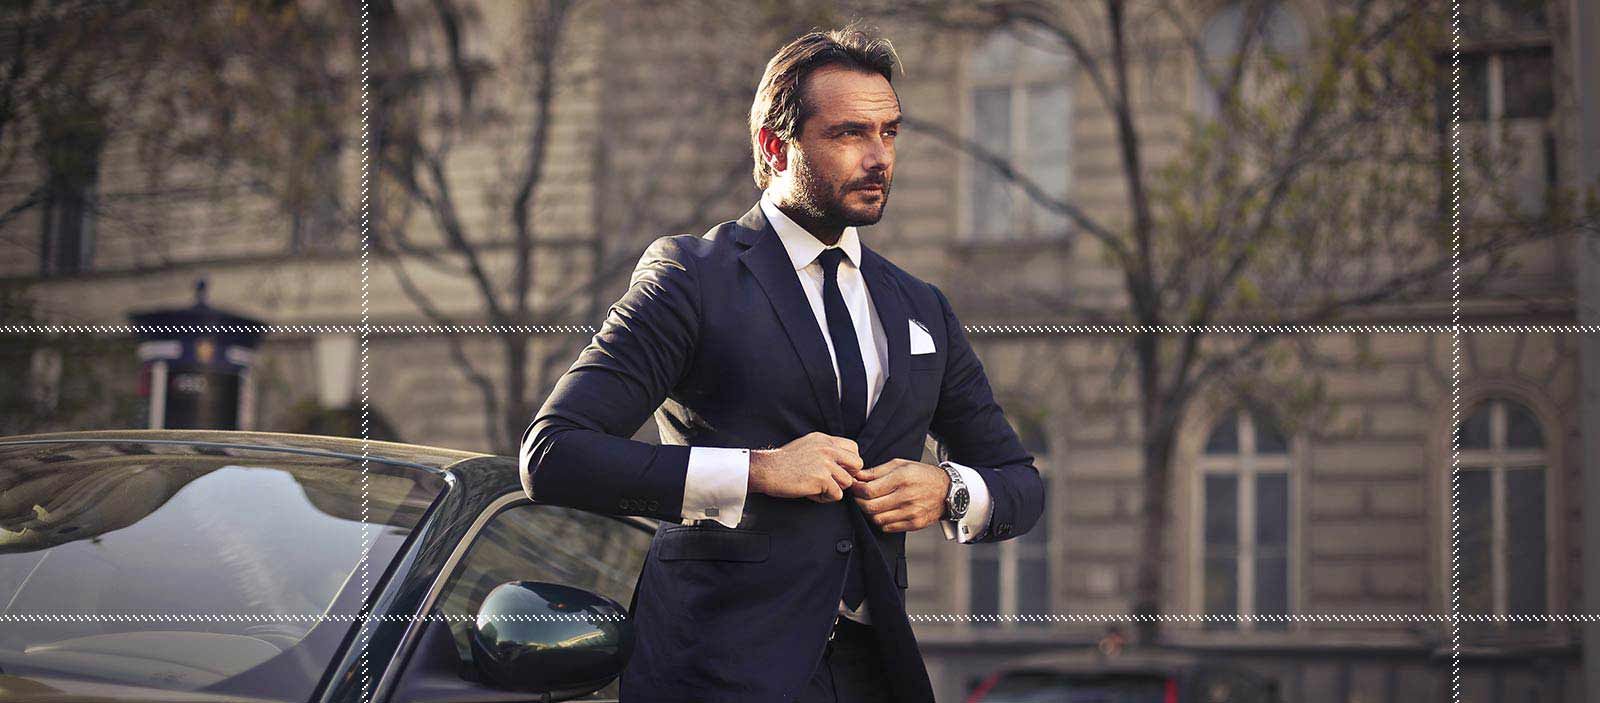 A brief history of suits